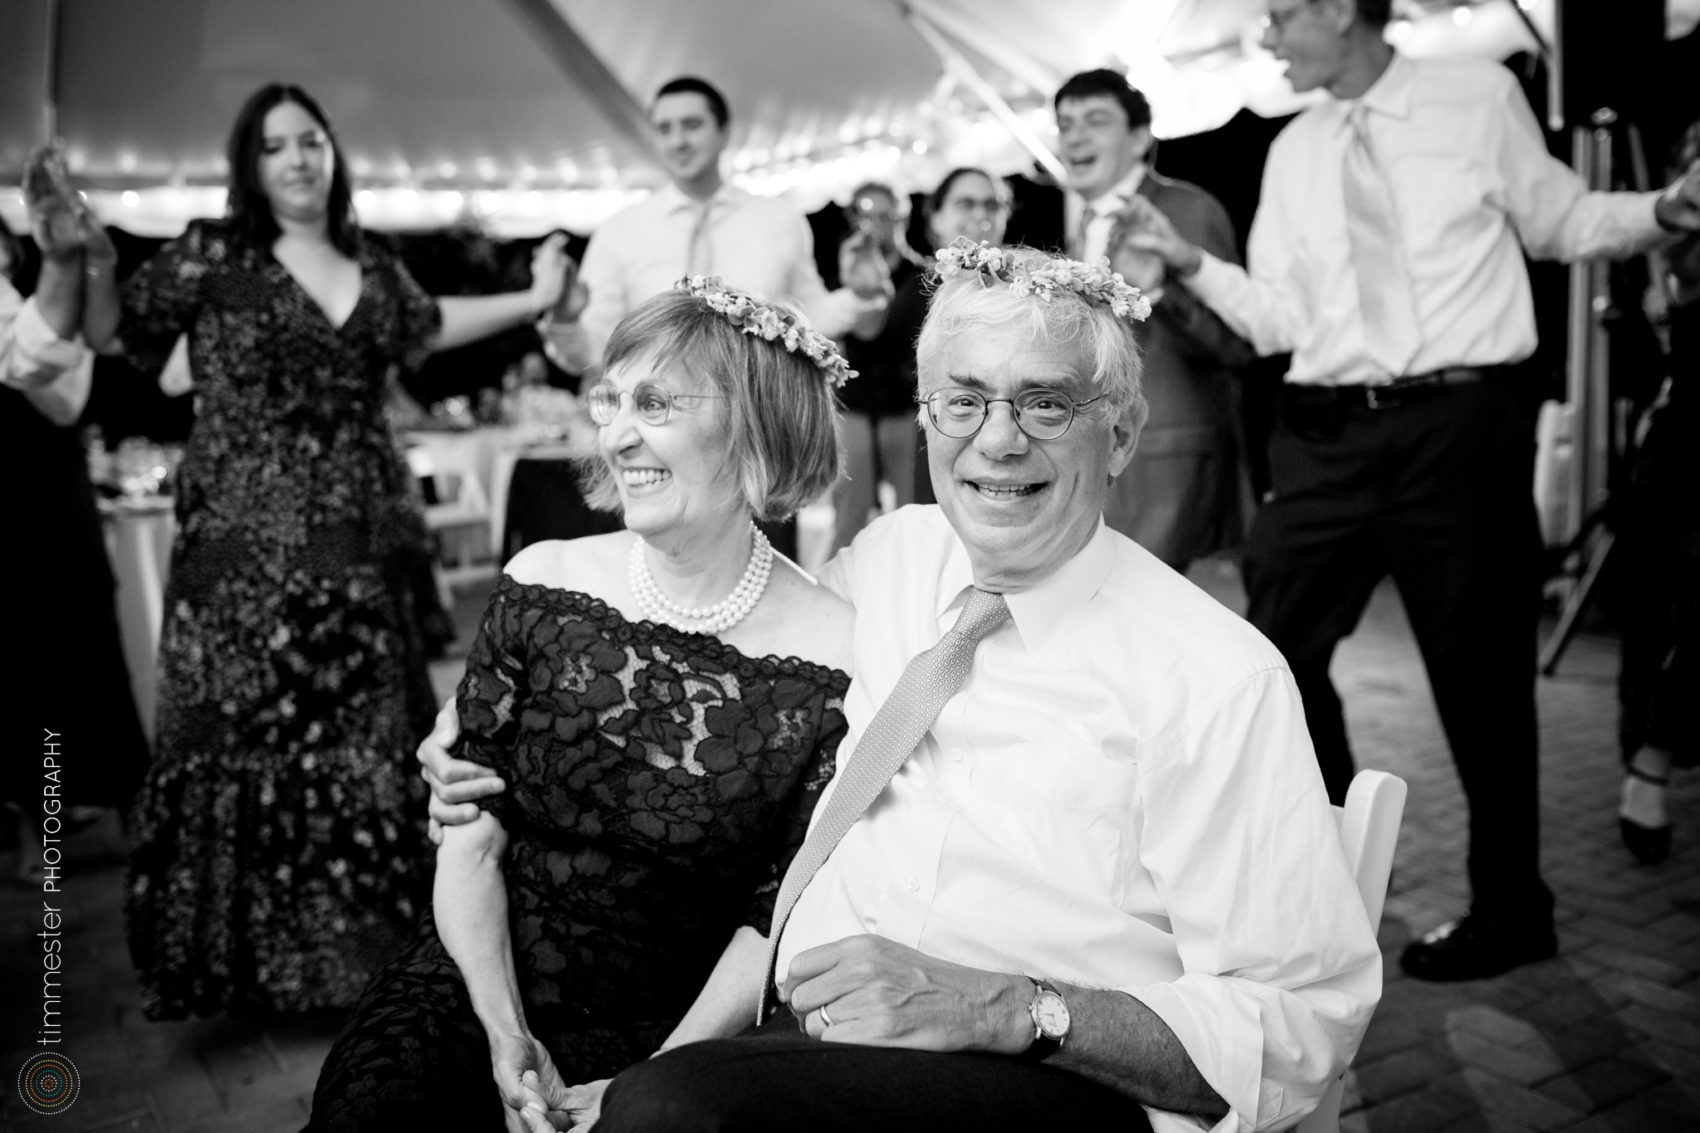 A Durham, NC wedding reception at the Museum of Life and Science